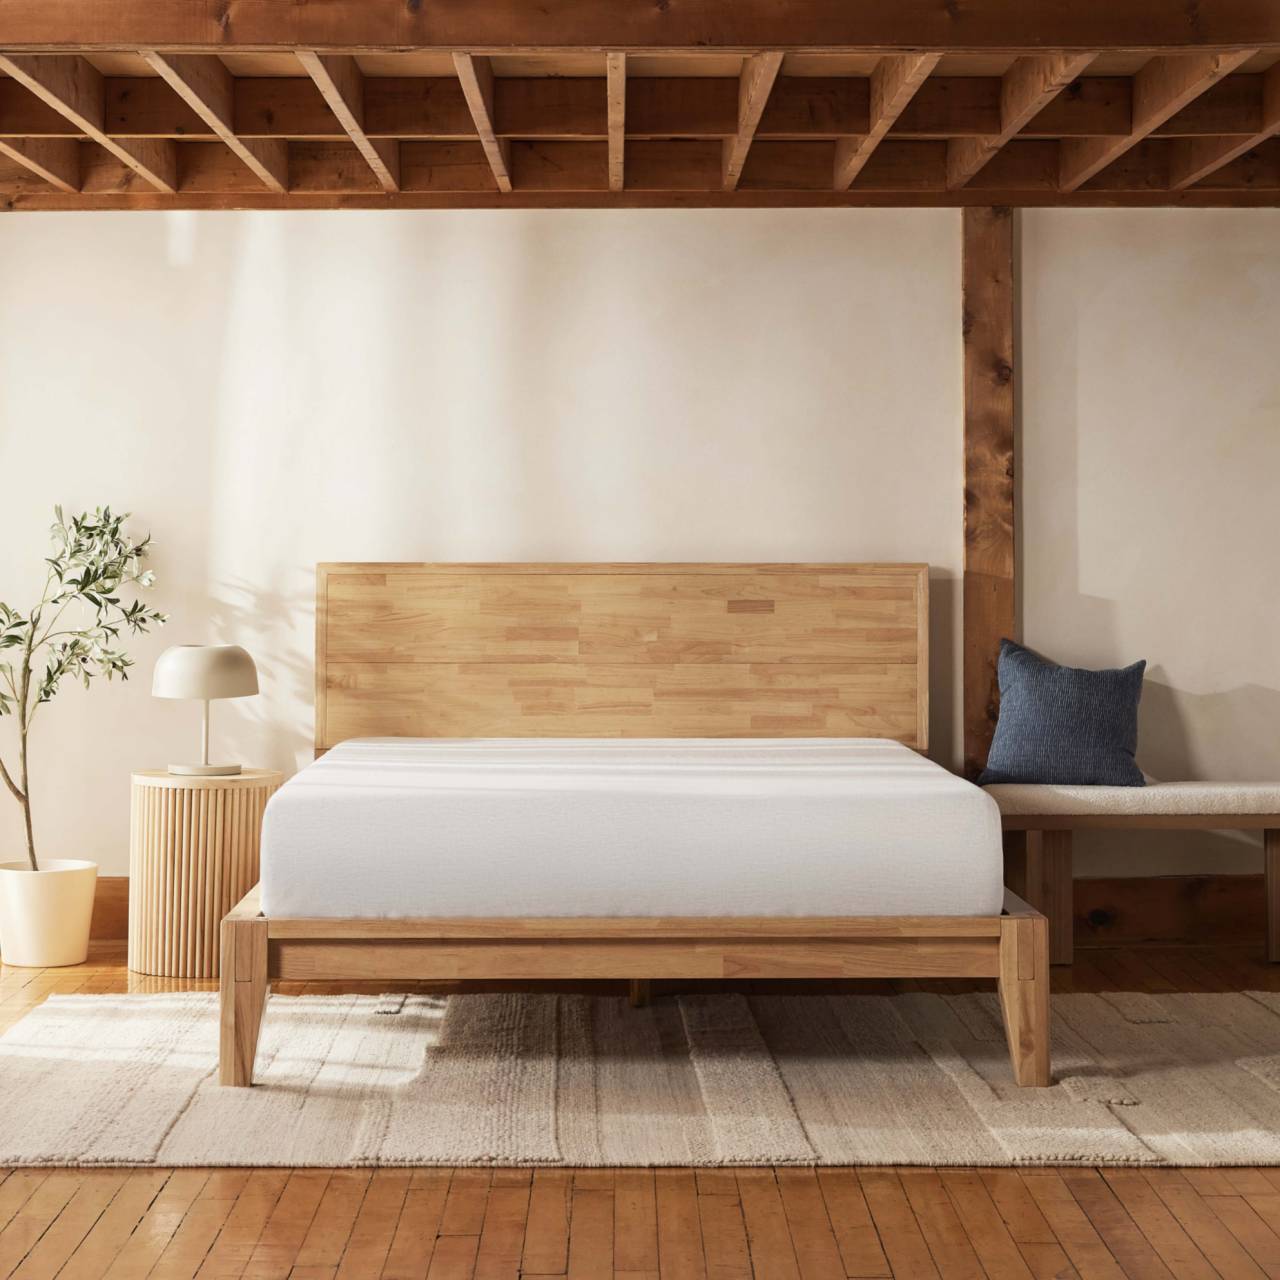 11 Best Bed Frames to Buy in 2022 - Top-Rated Bed Frame Reviews